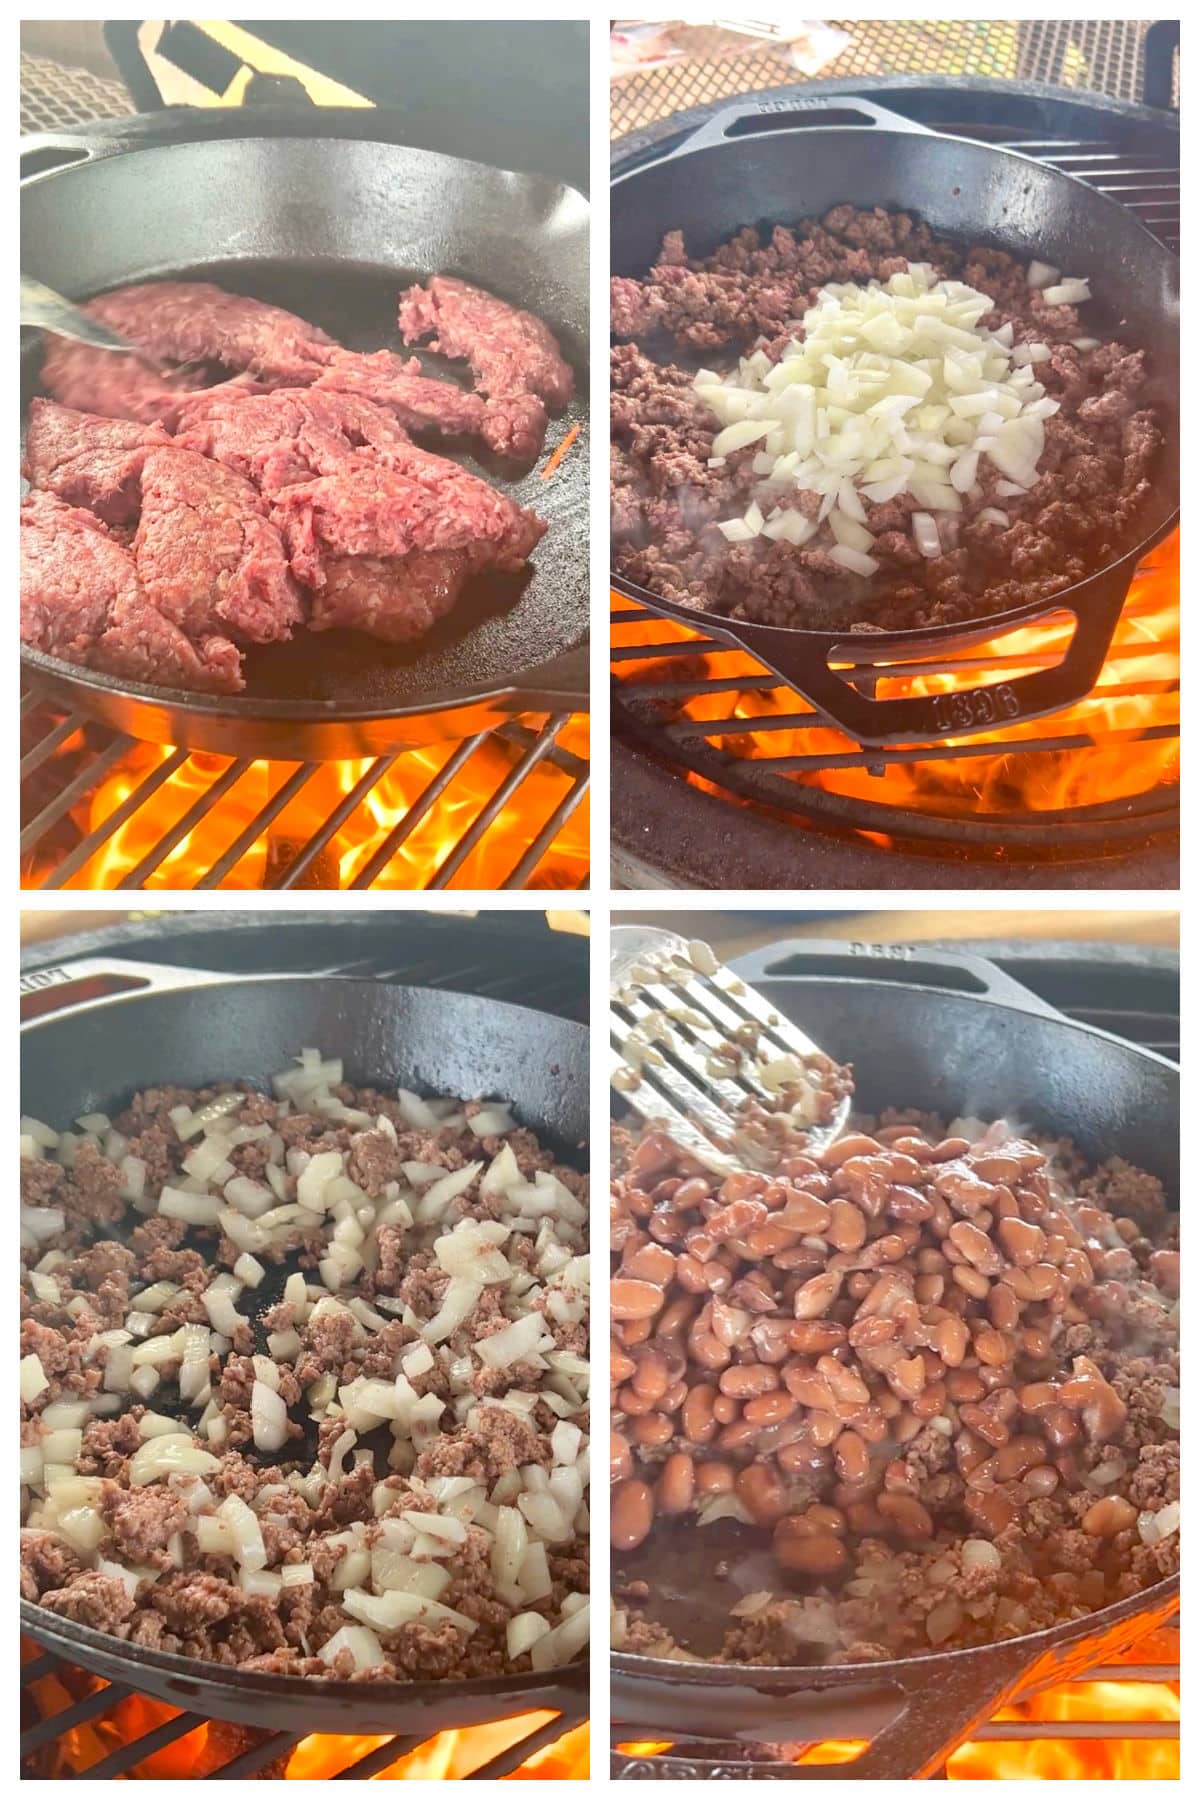 Collage browning ground beef, onions, adding beans in a skillet on grill.